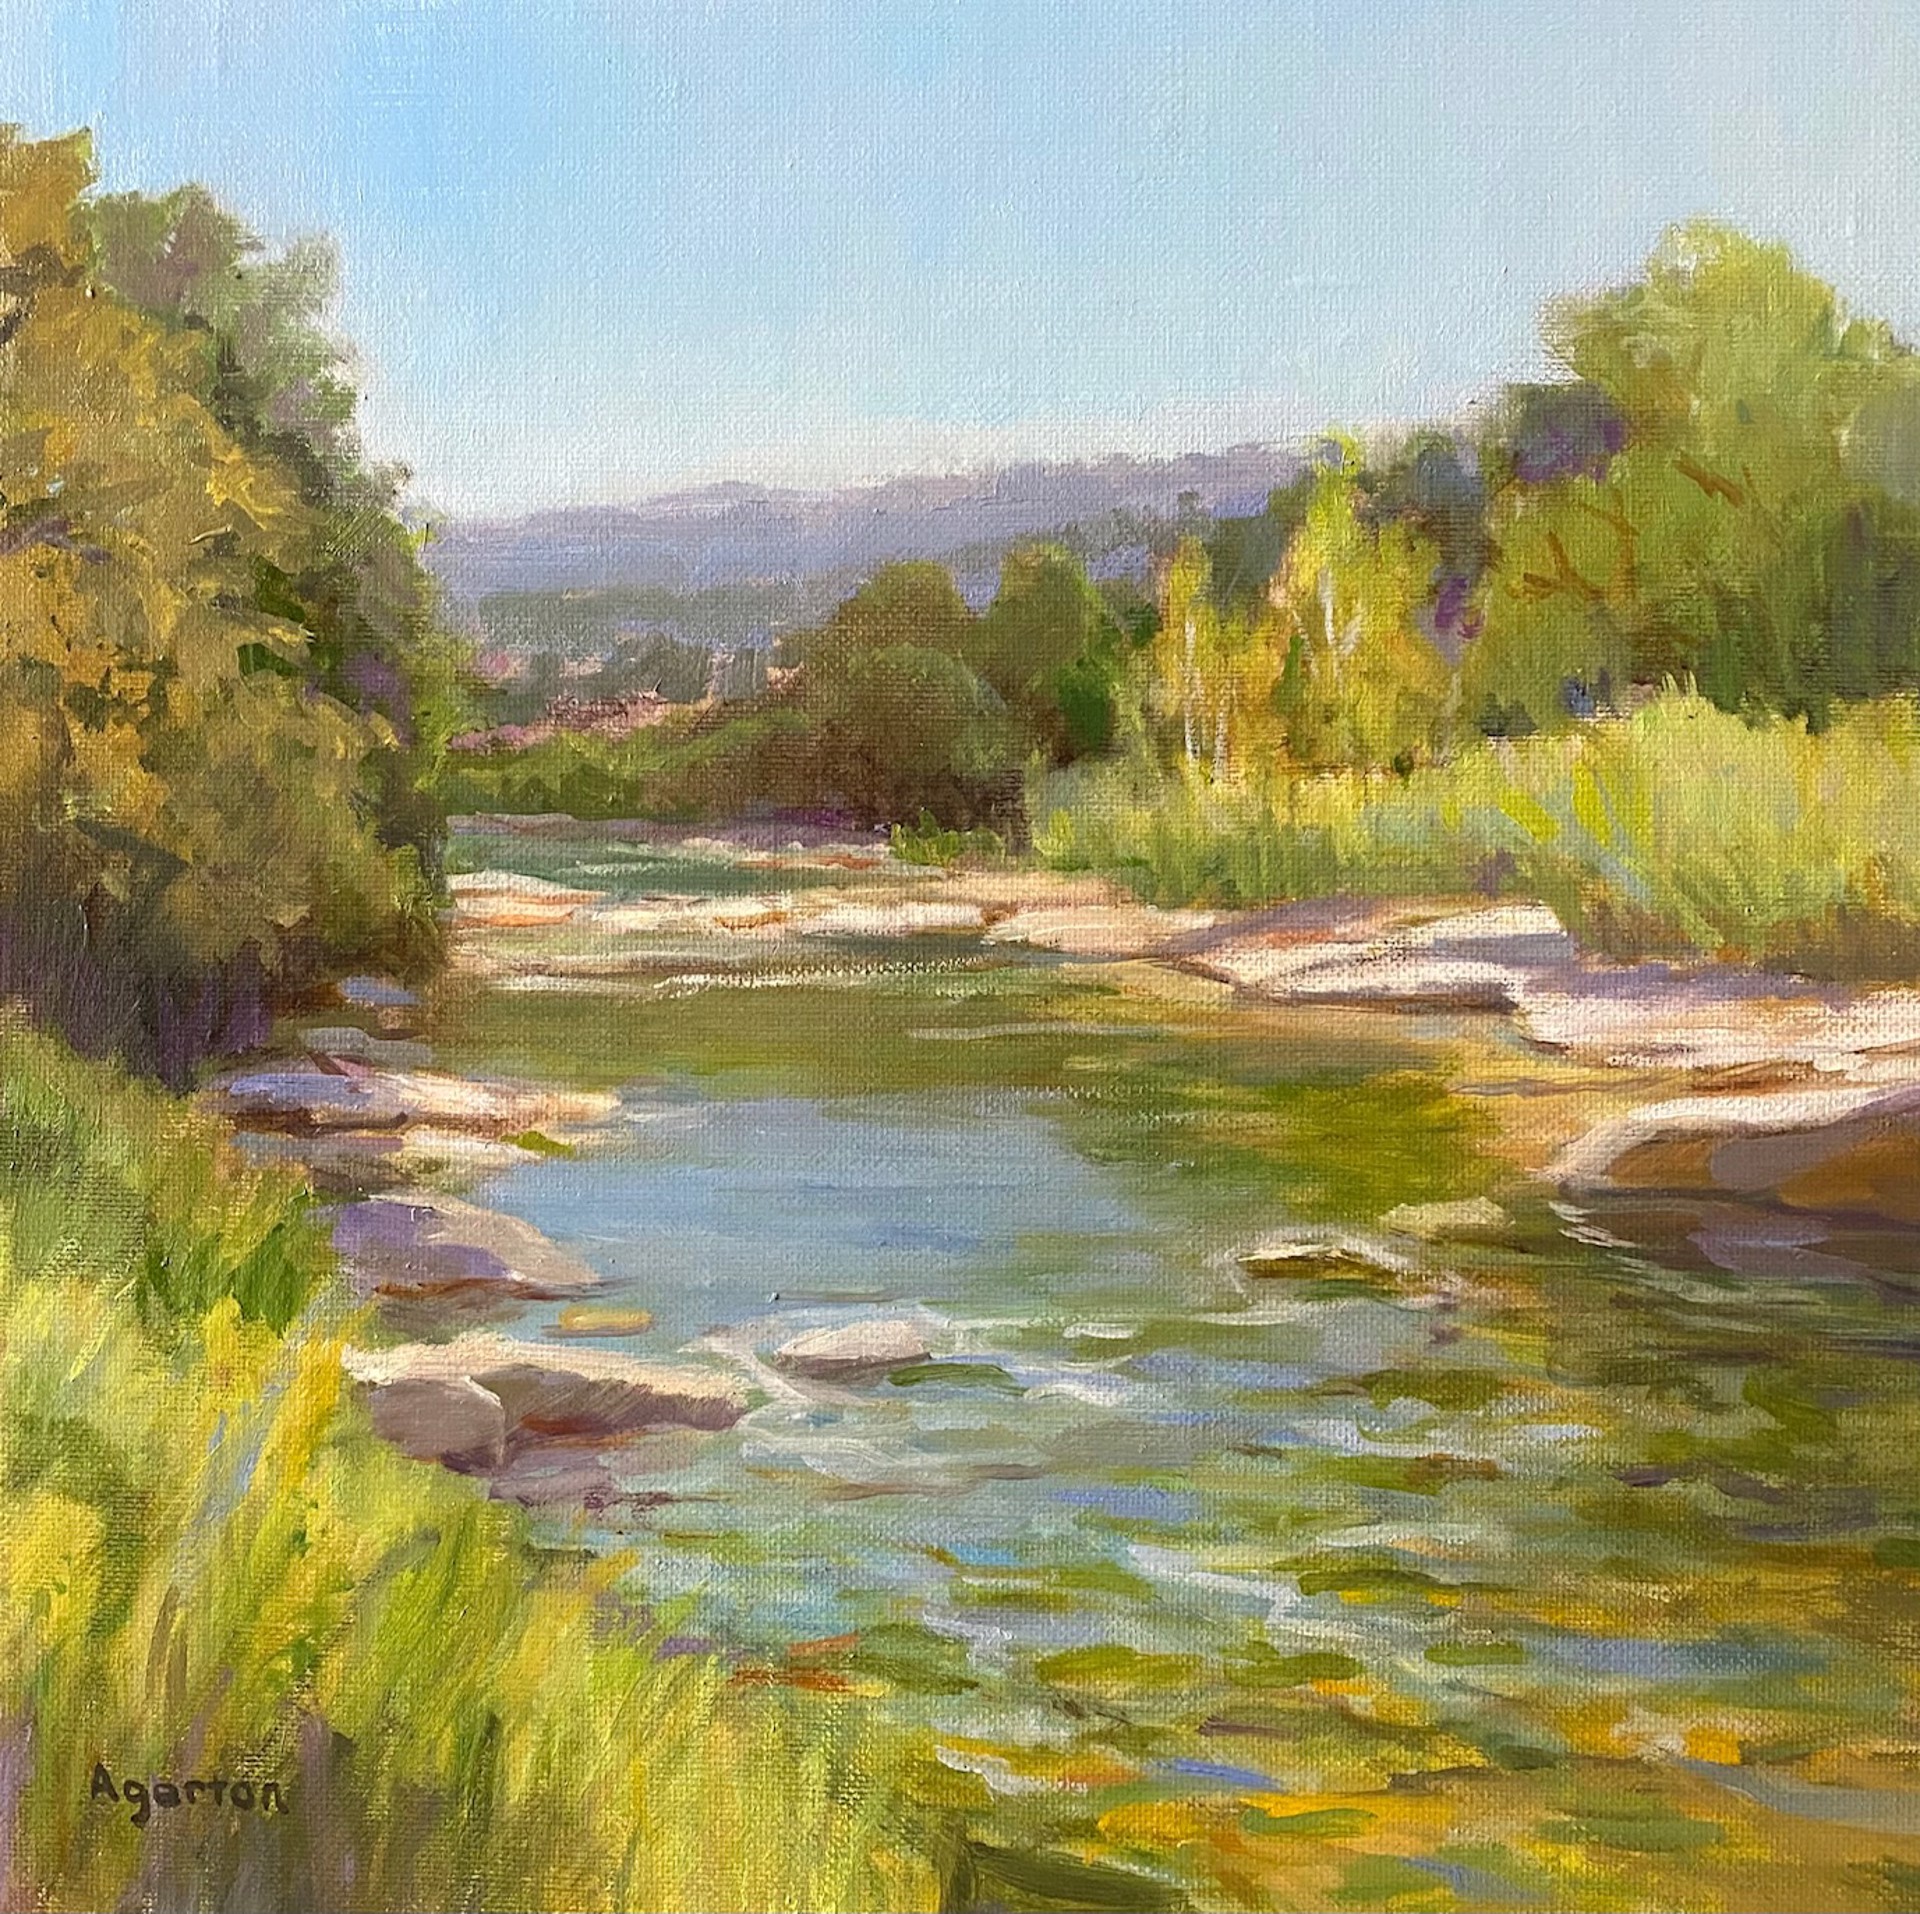 Little Creek by Mallory Agerton